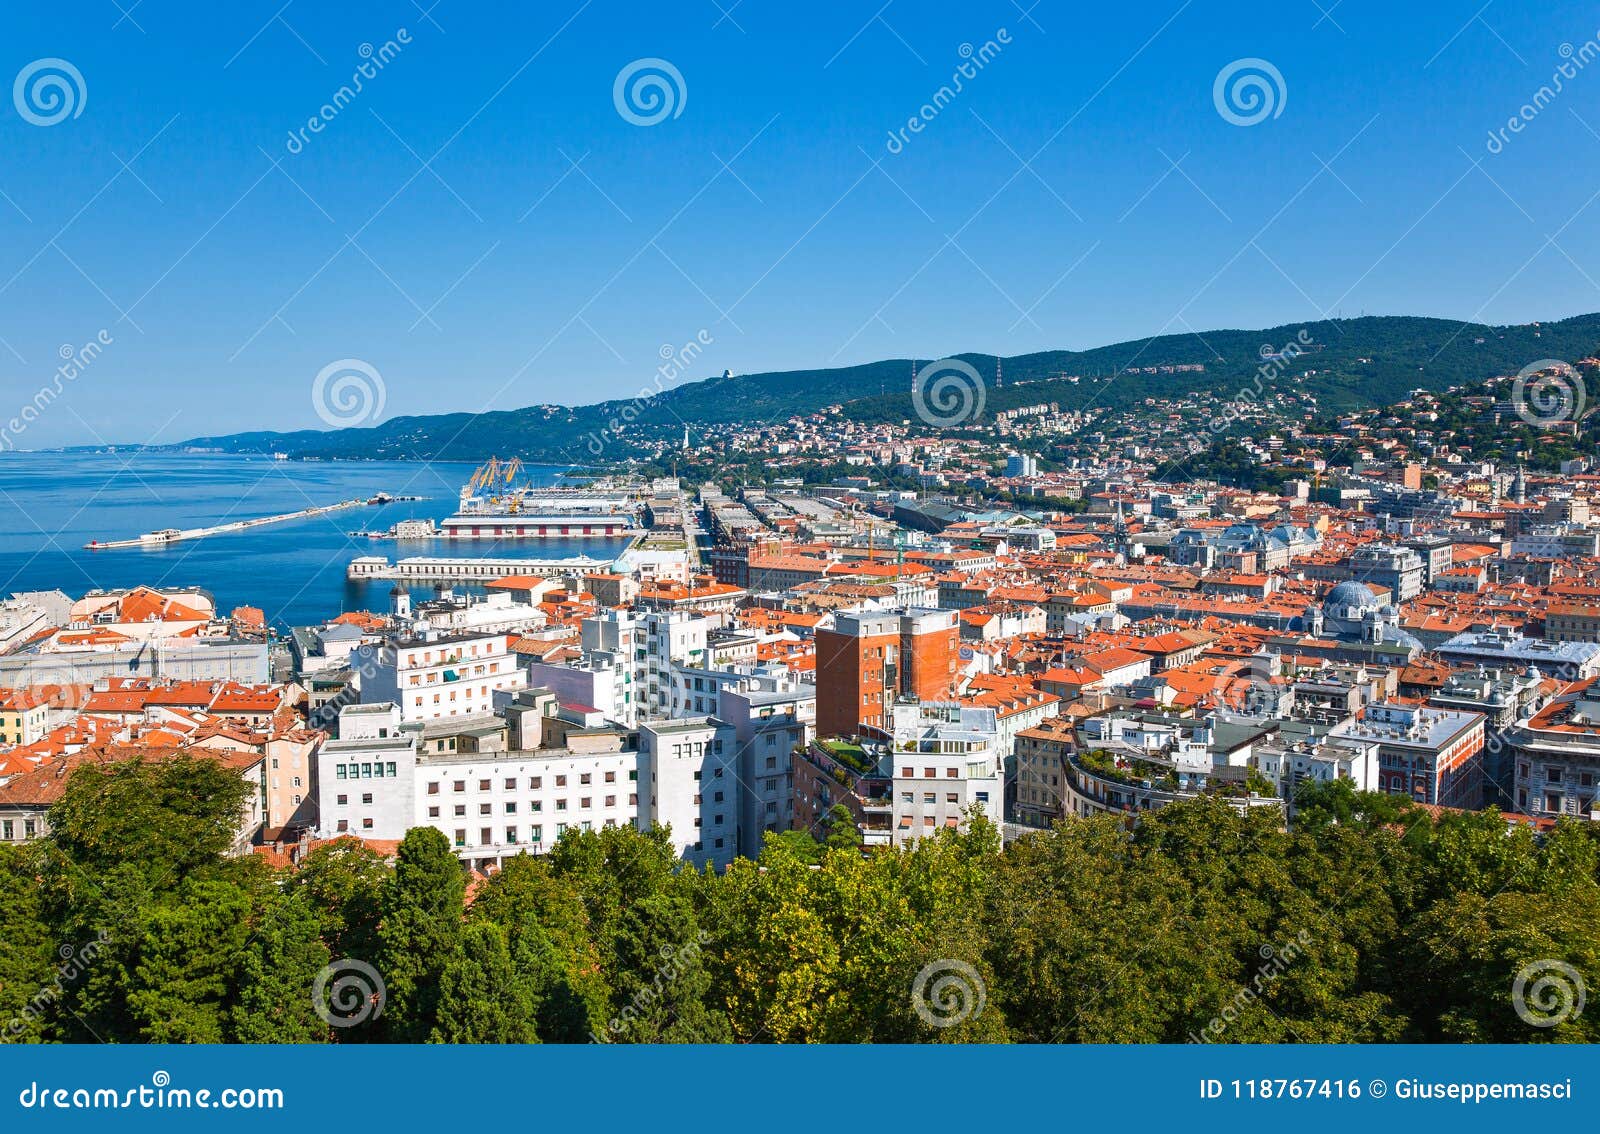 trieste, the architectures and arts